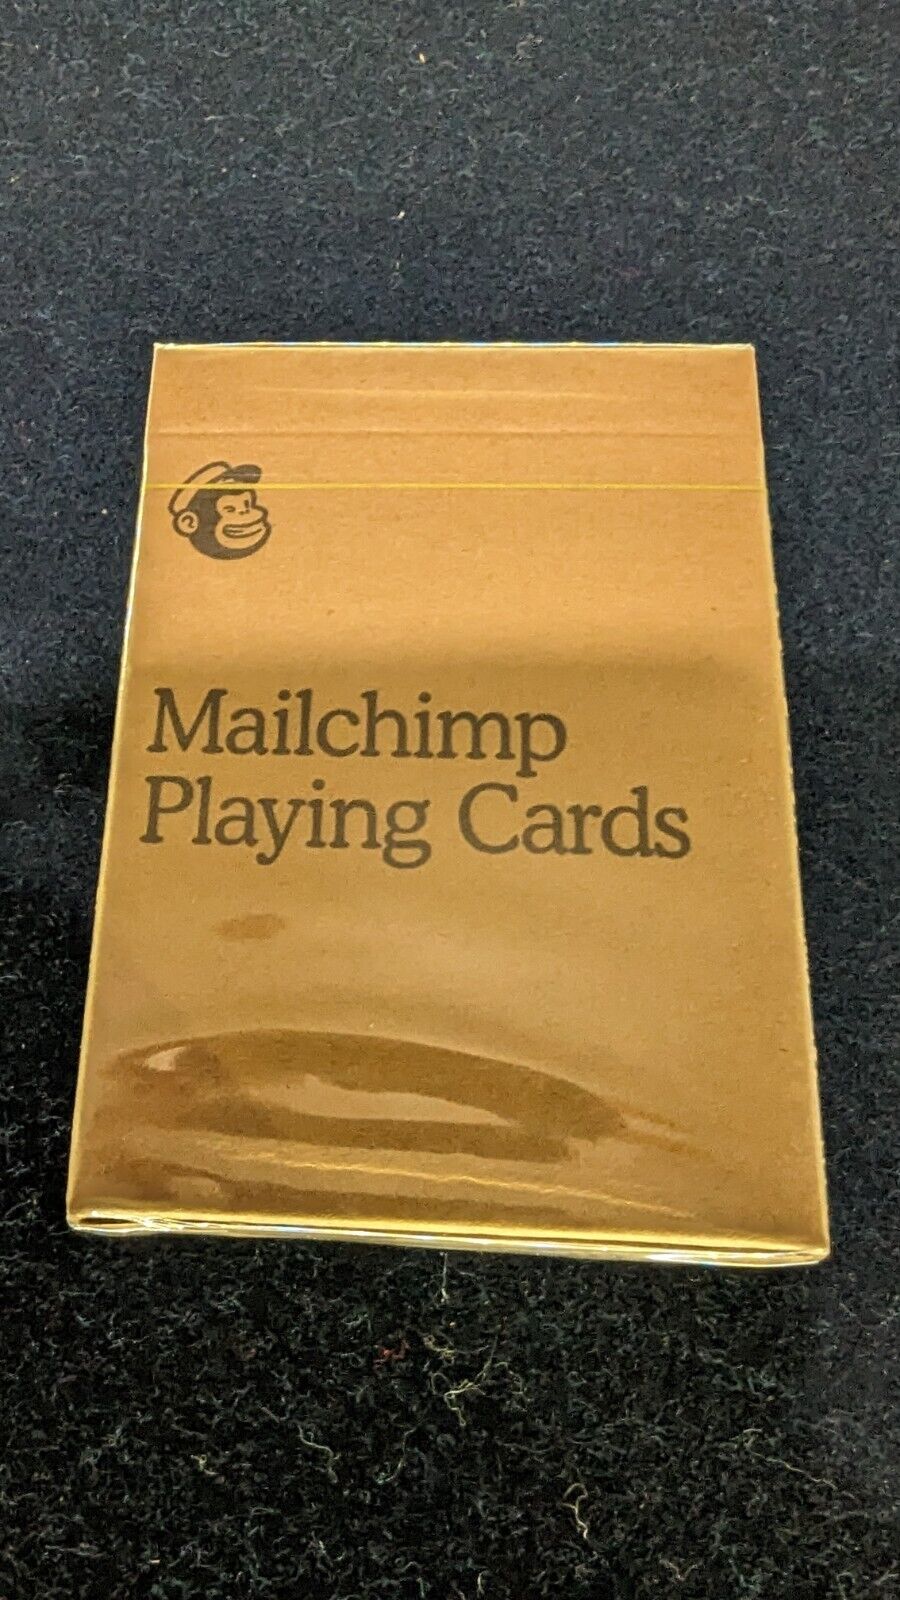 Mailchimp Playing Cards - Rare Kraft Edition by theory11